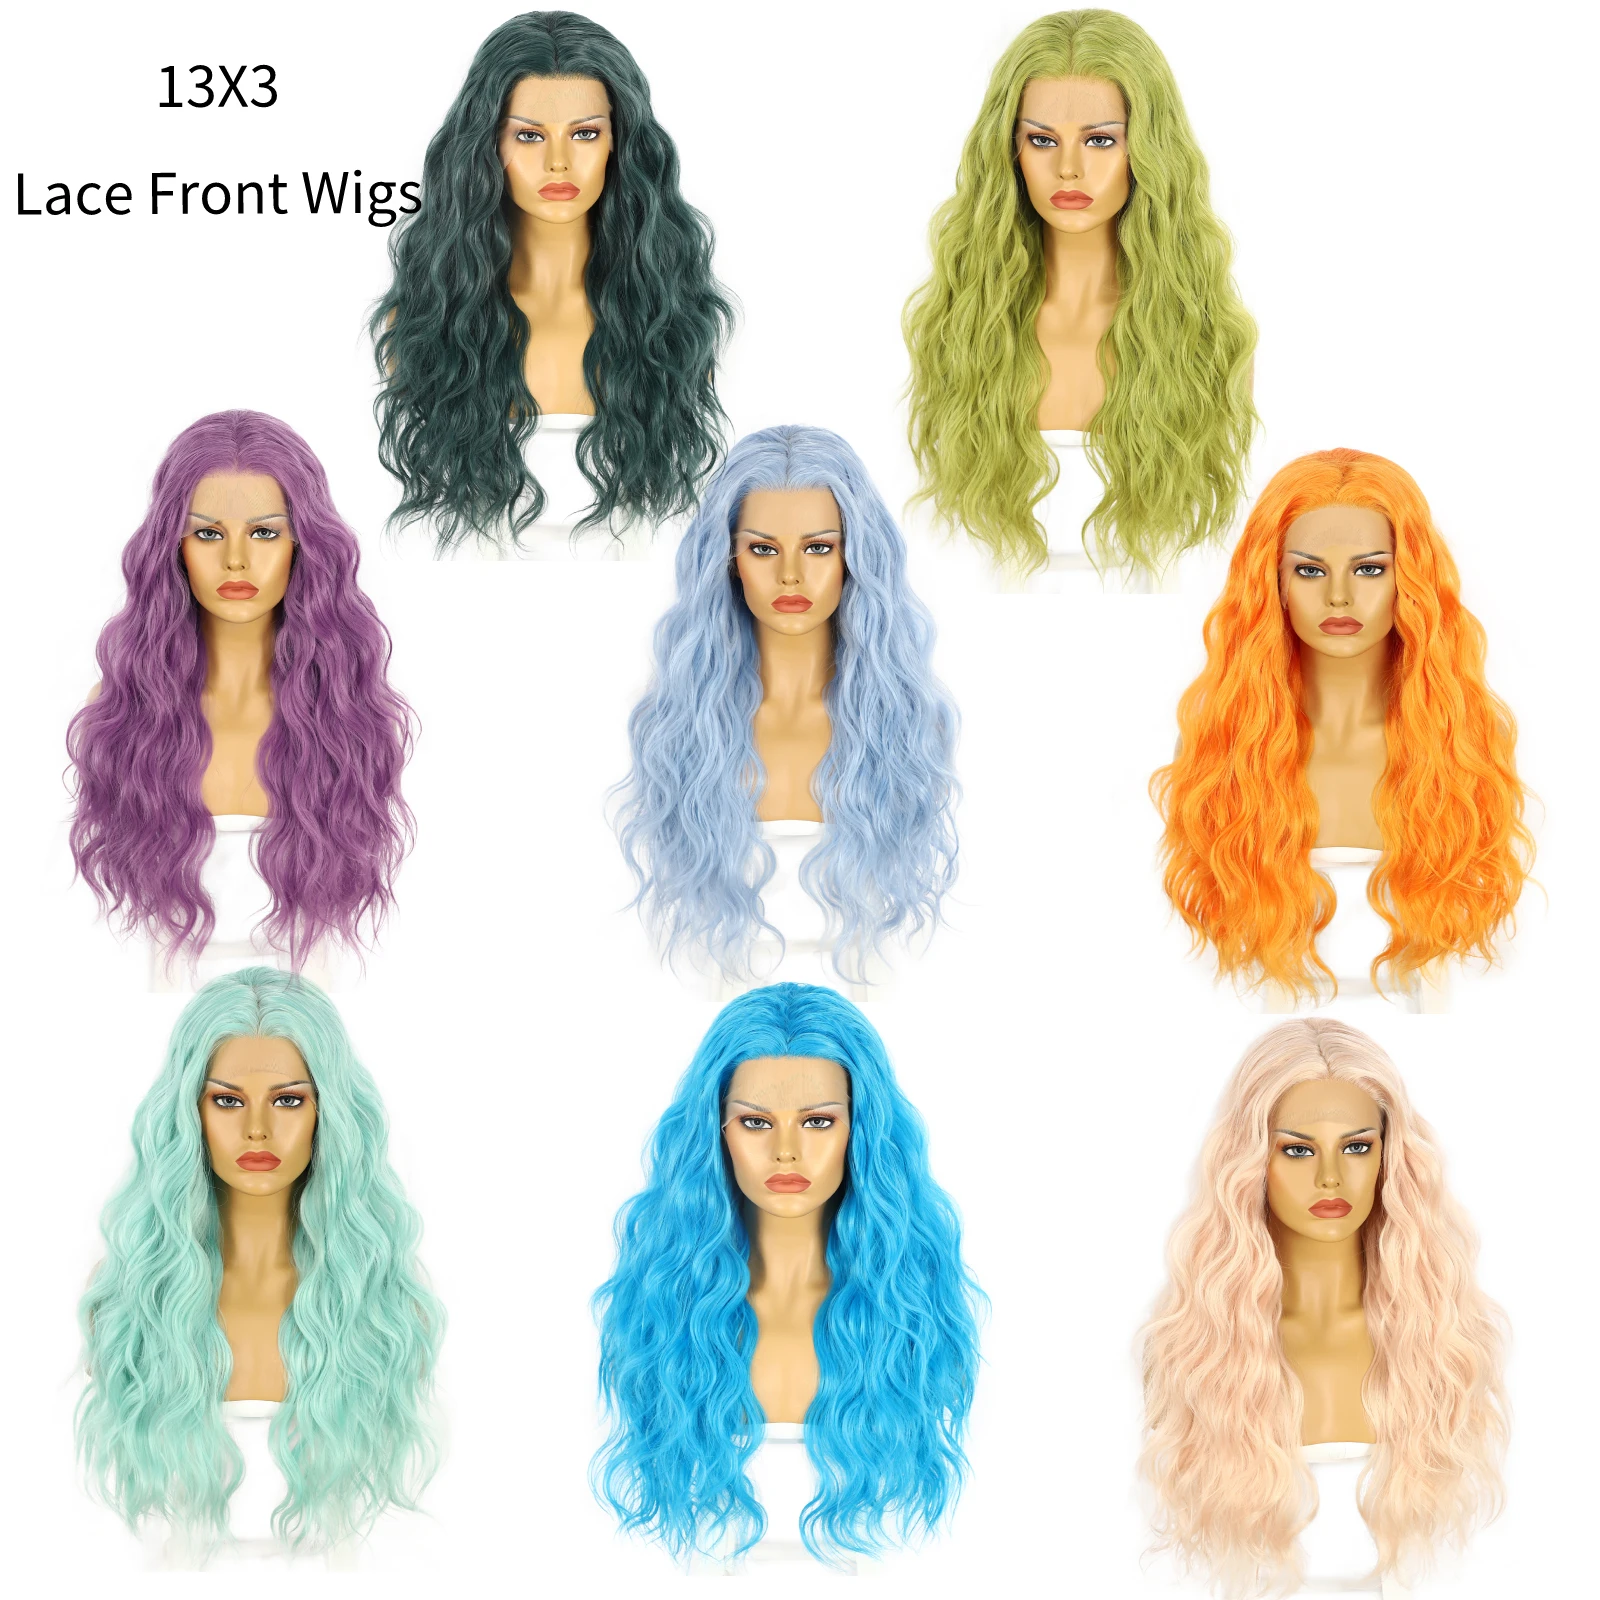 30inch Lace front Wig 13x3 High Temperature Fiber Synthetic Wigs Dyed Wigs Green Multicolor Fashion Hair Wig for Black Women